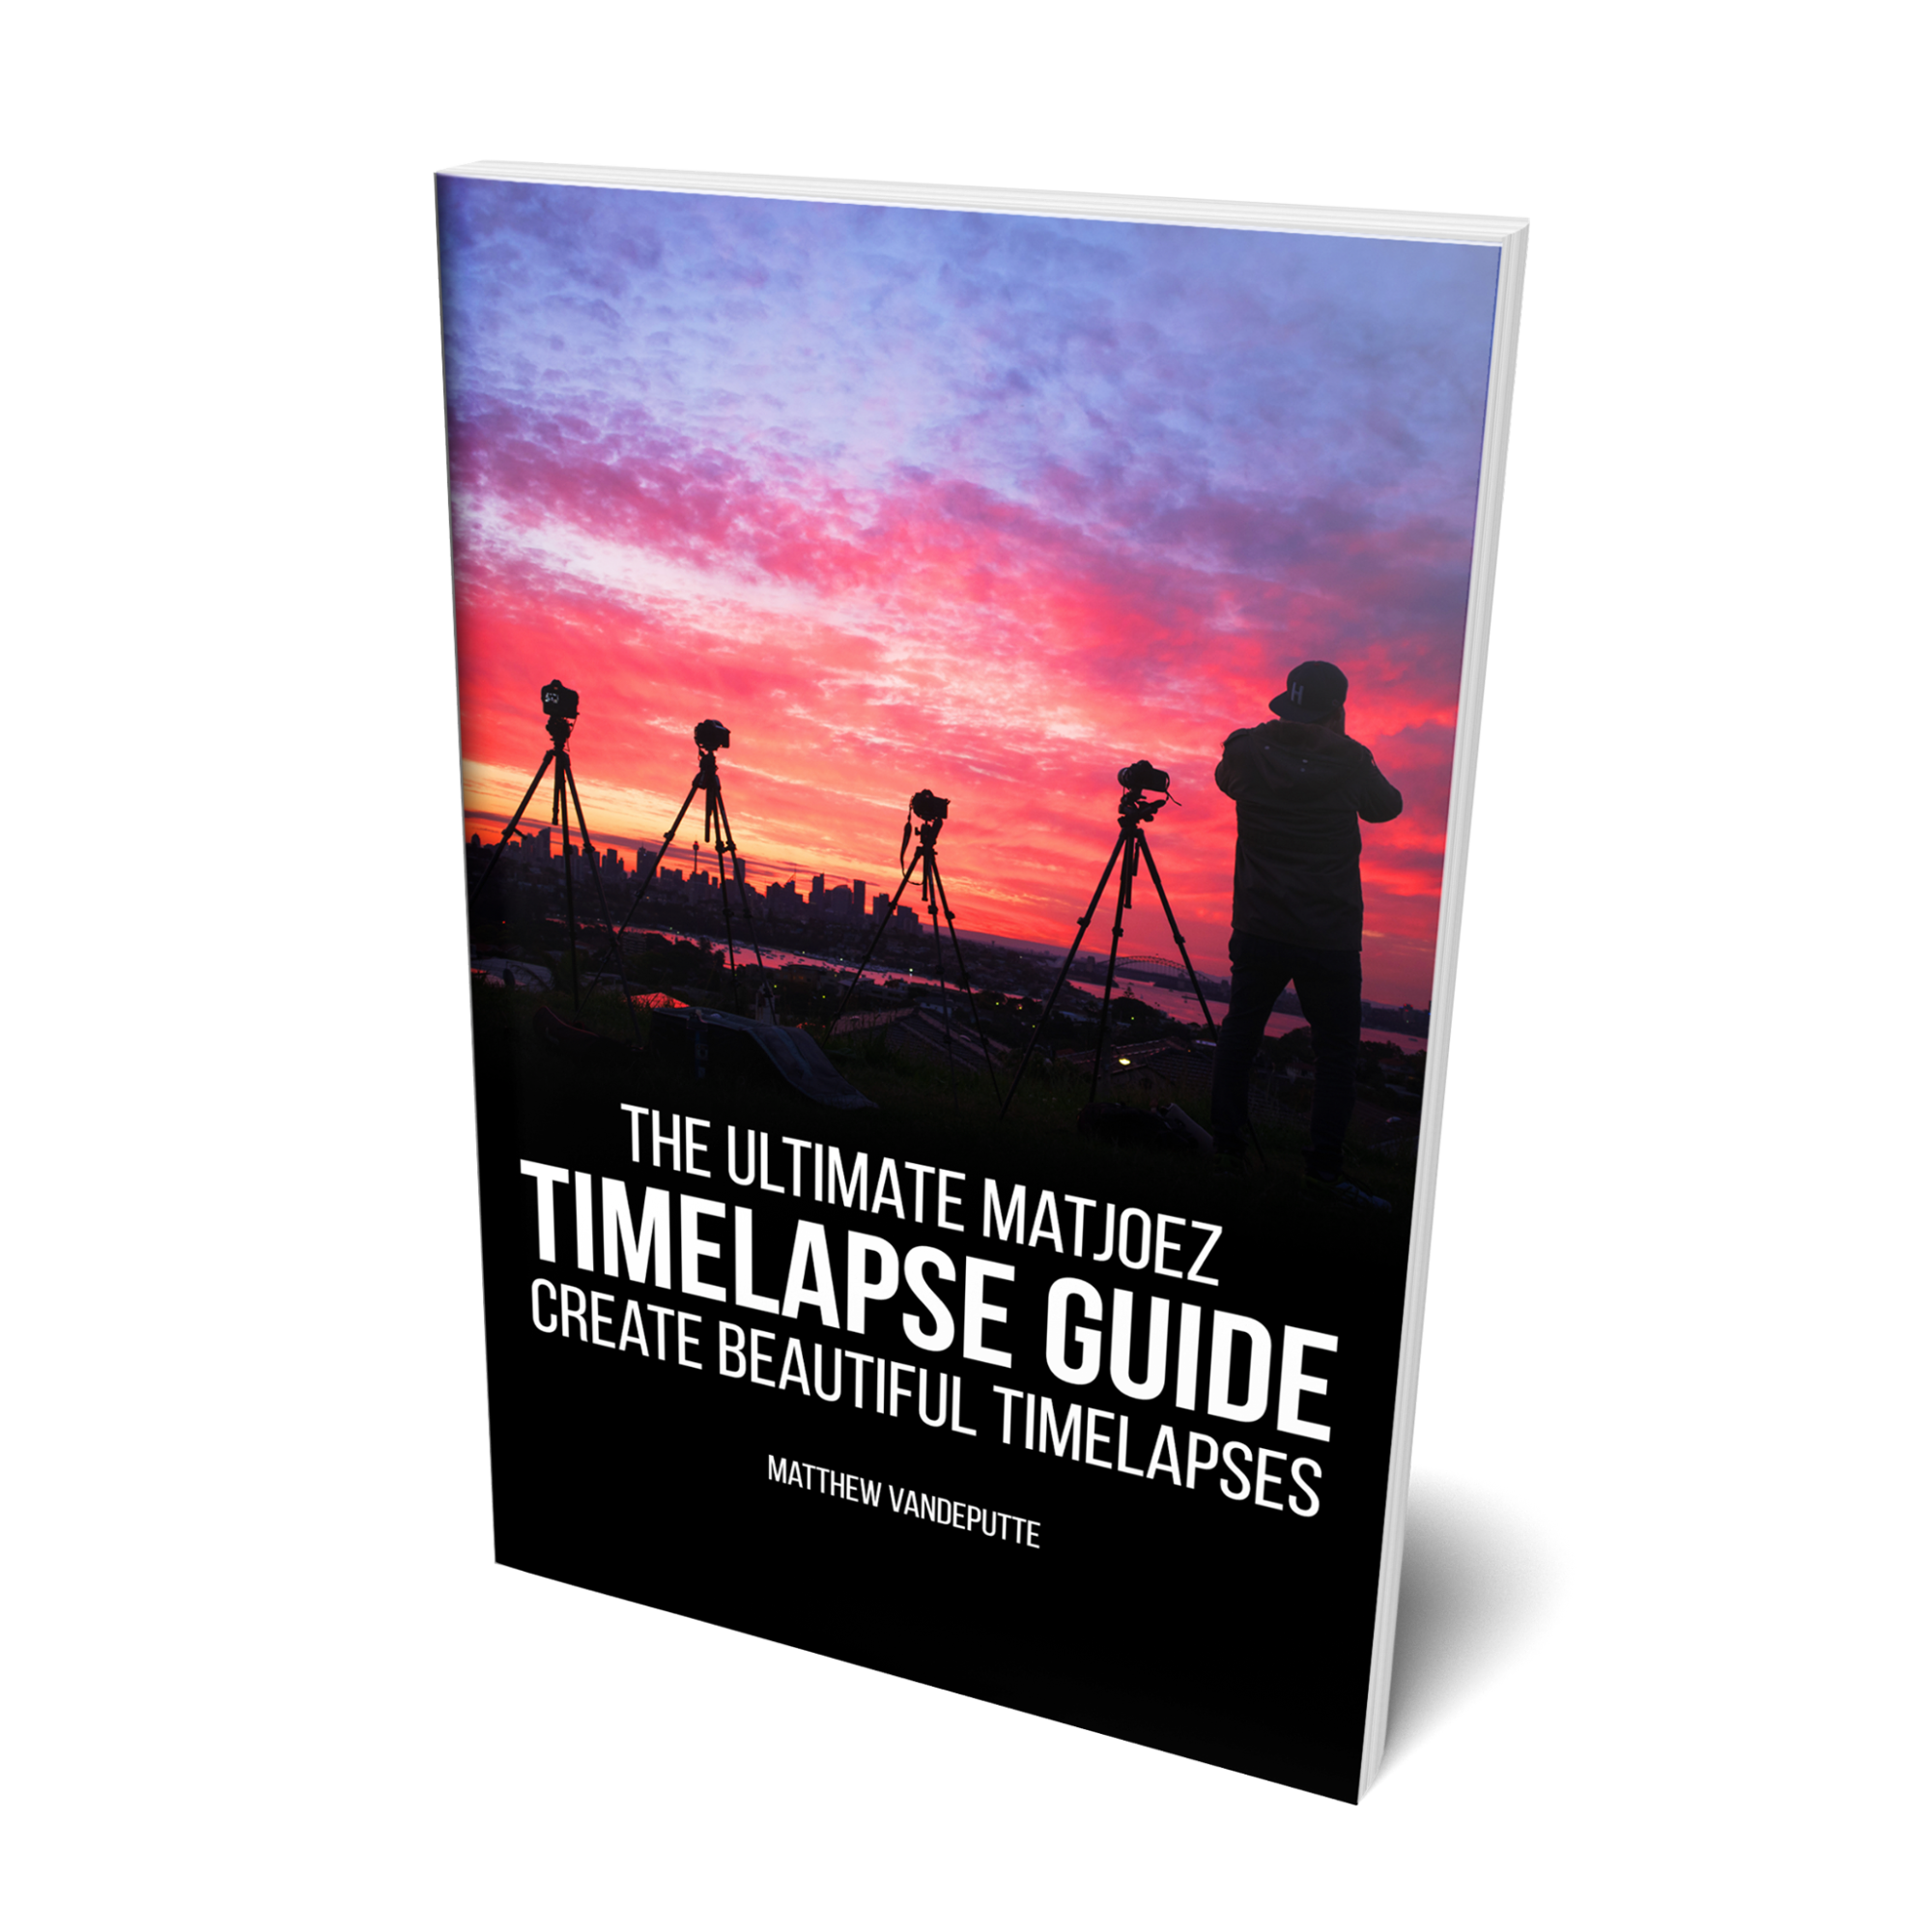 The Ultimate Timelapse Guide by Matthew Vandeputte